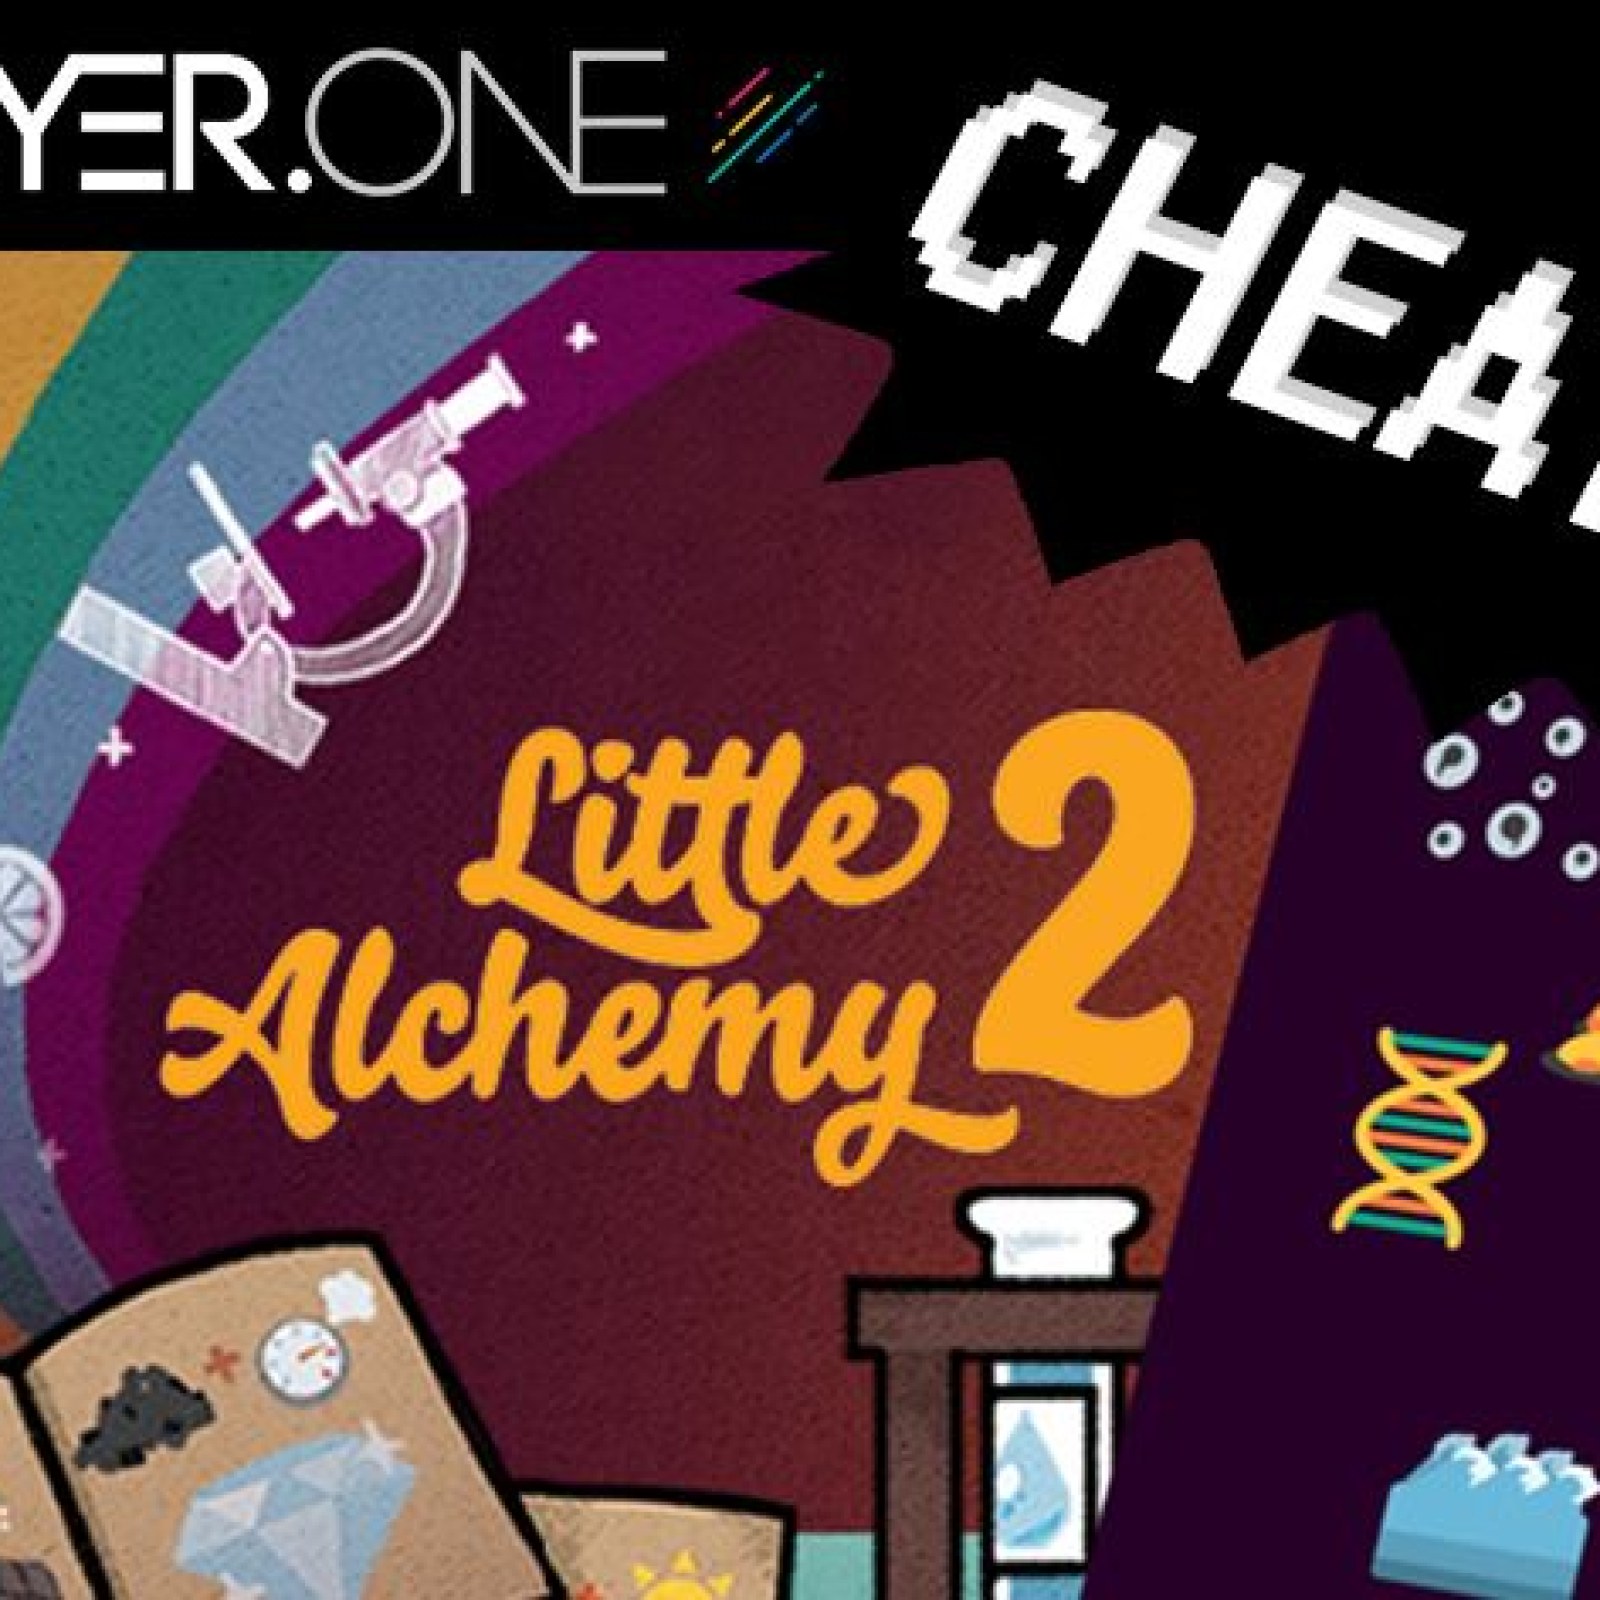 Complete List Of Little Alchemy 2 Cheats & Hints Part 2 ( I - Z  Combinations)